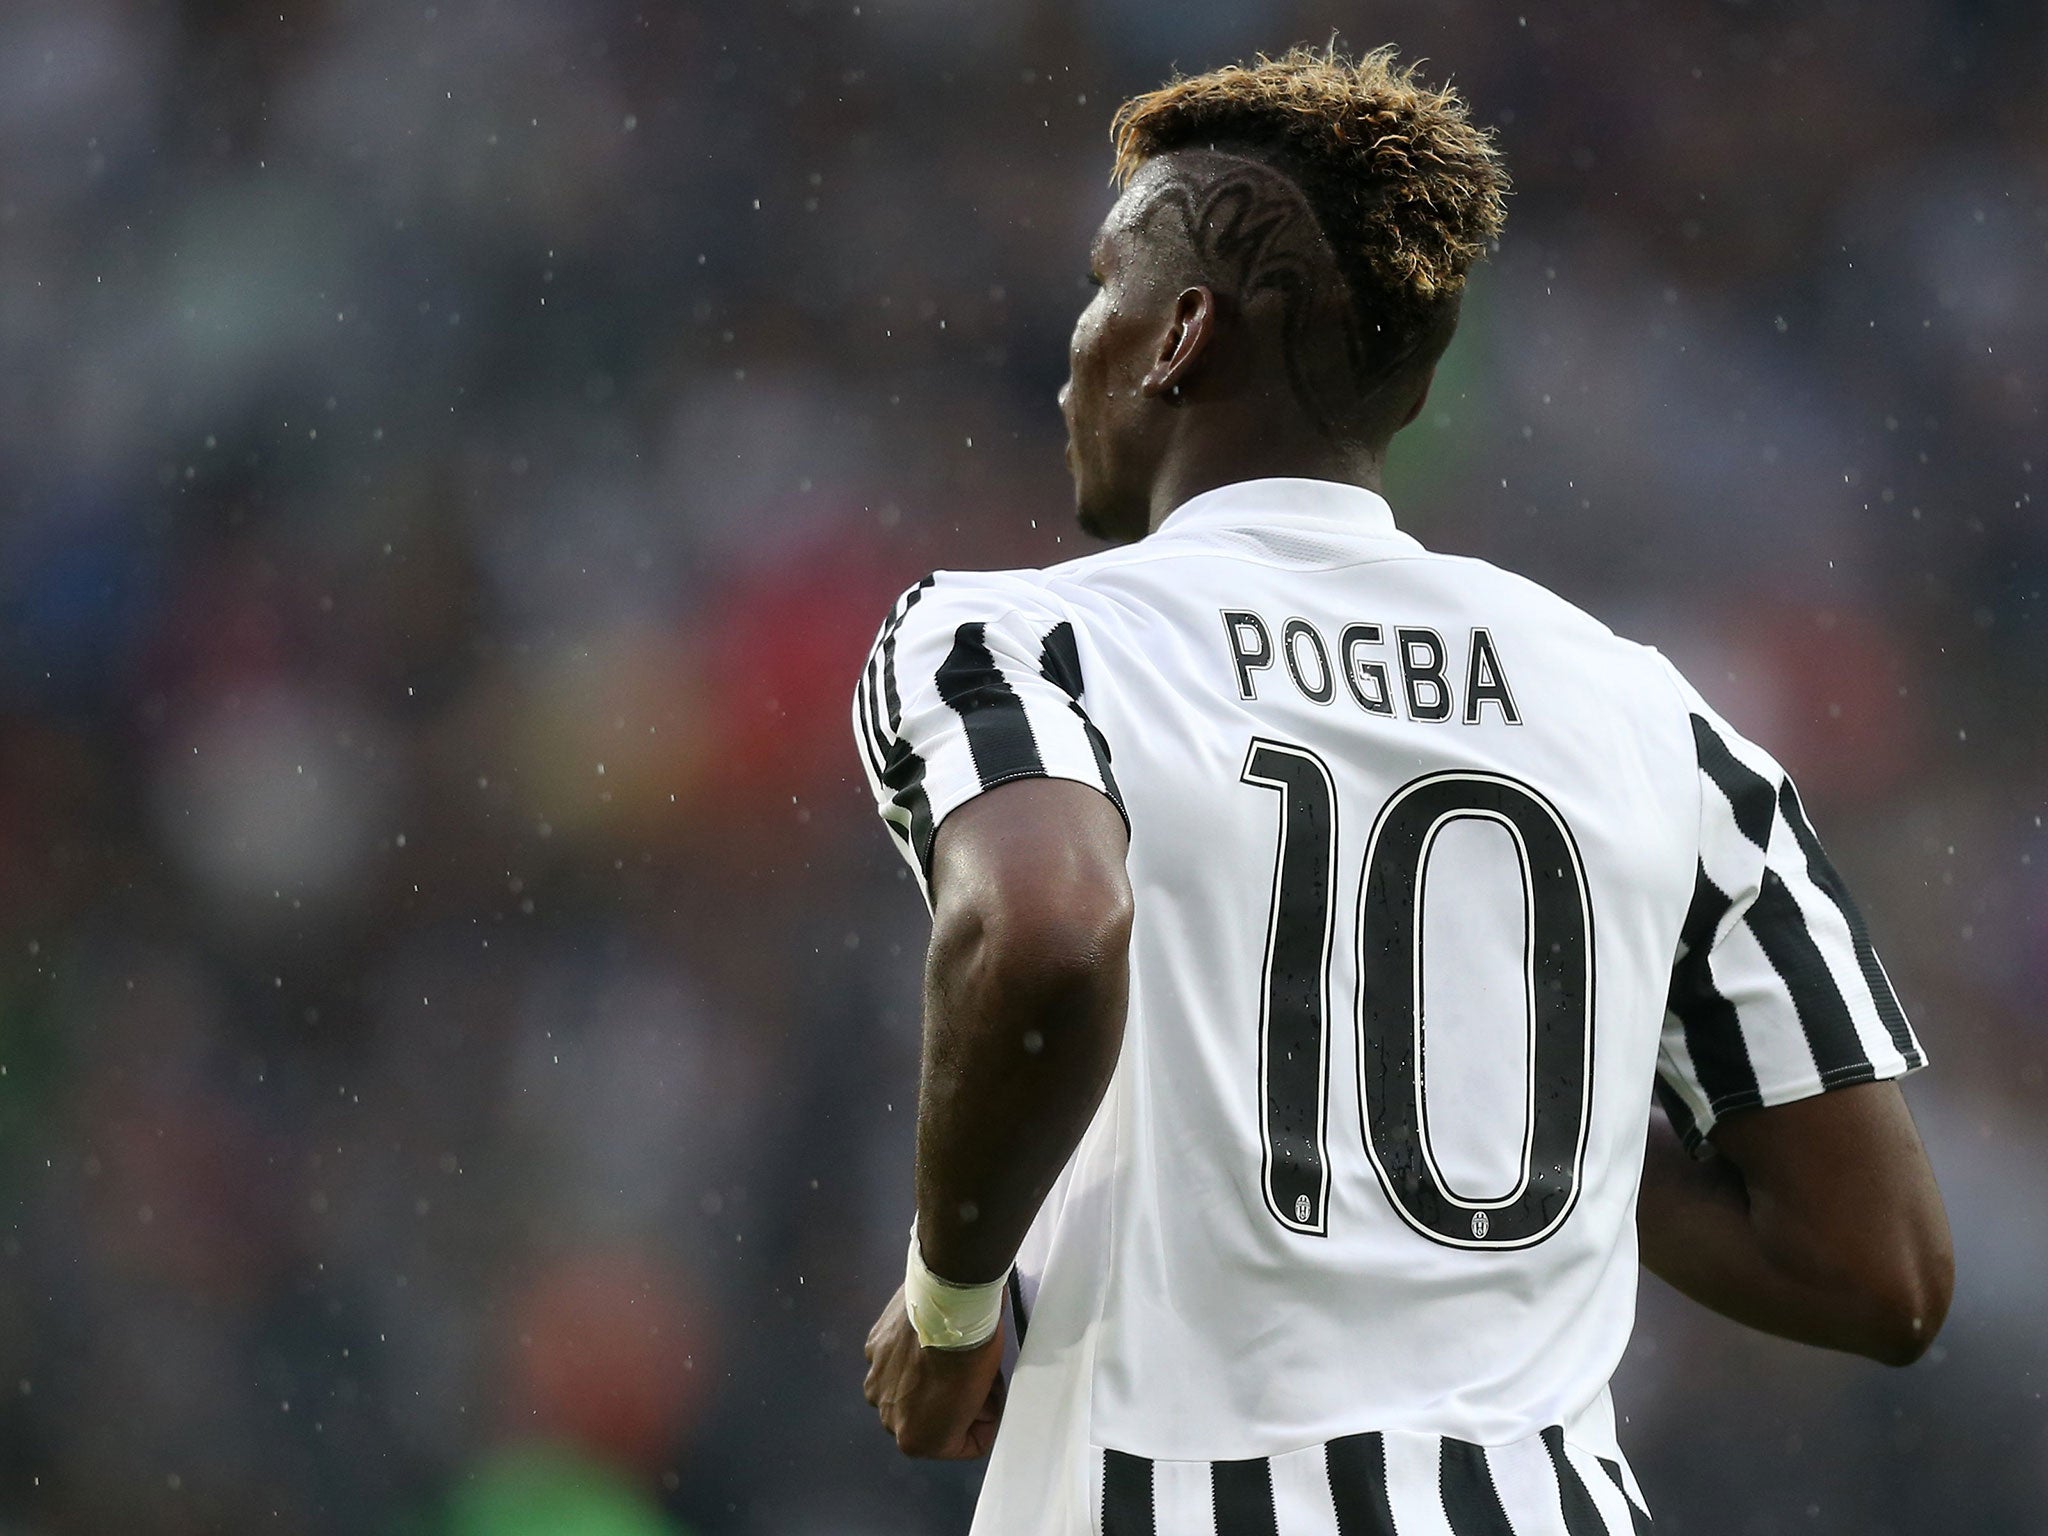 Paul Pogba has been linked with Chelsea